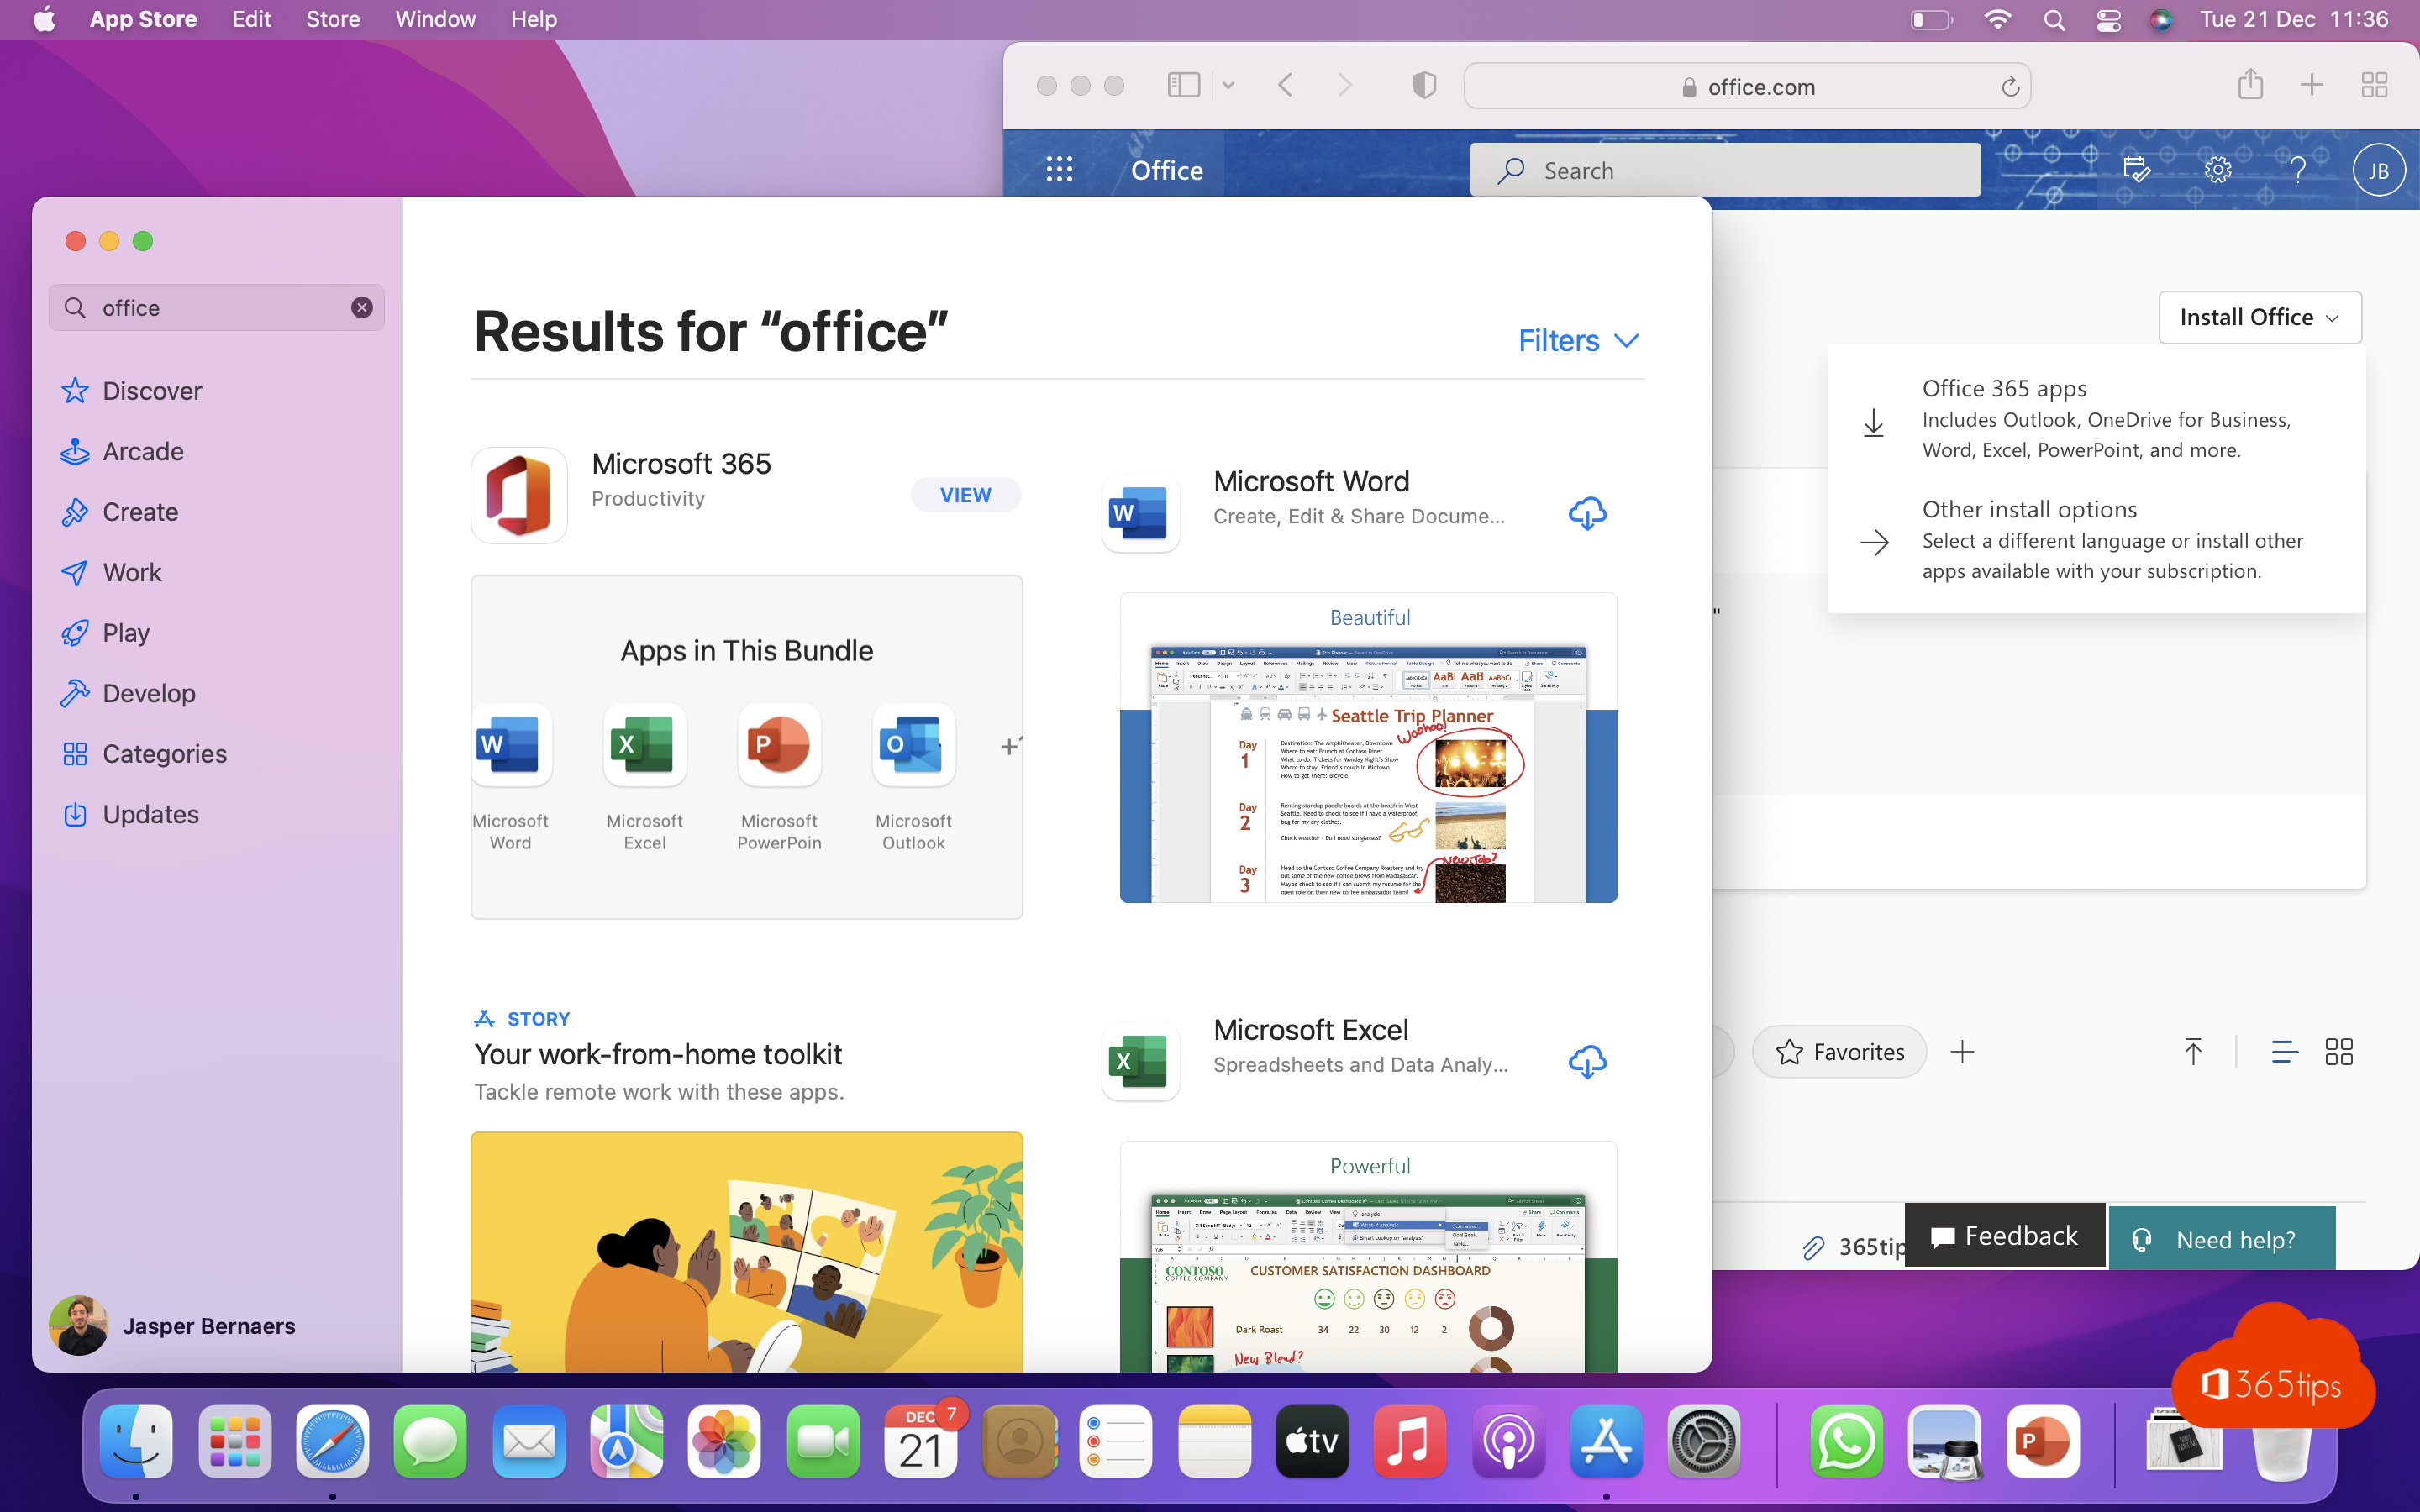 MacOS: How to install Office 365 Apps on a Mac?